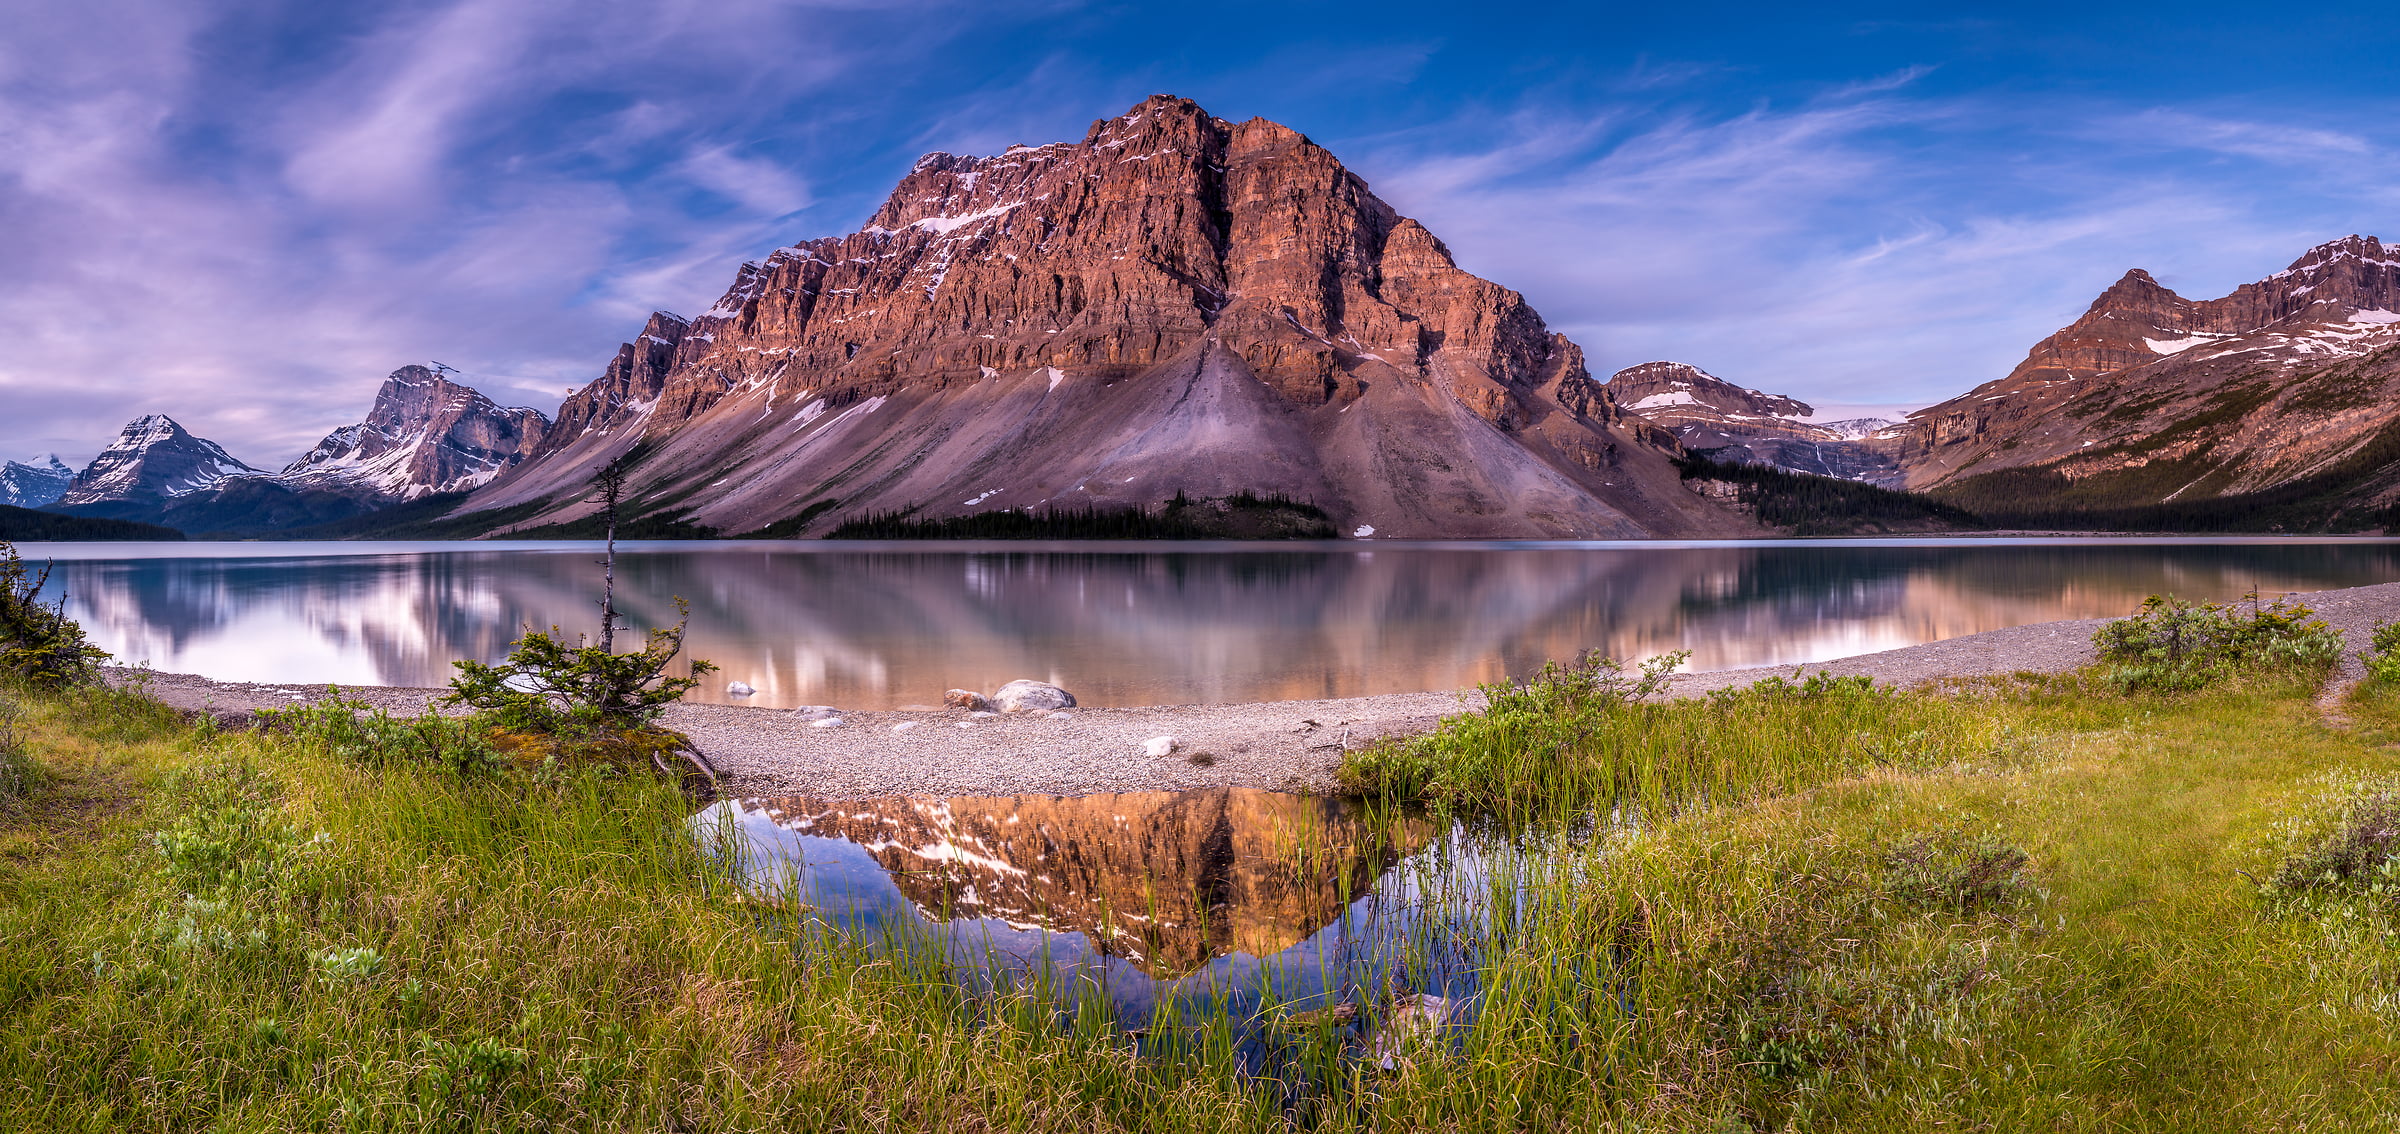 94 megapixels! A very high resolution, large-format VAST photo print of Bow Lake, Banff National Park, and the Rocky Mountains; fine art landscape photo created by Tim Shields in Alberta, Canada